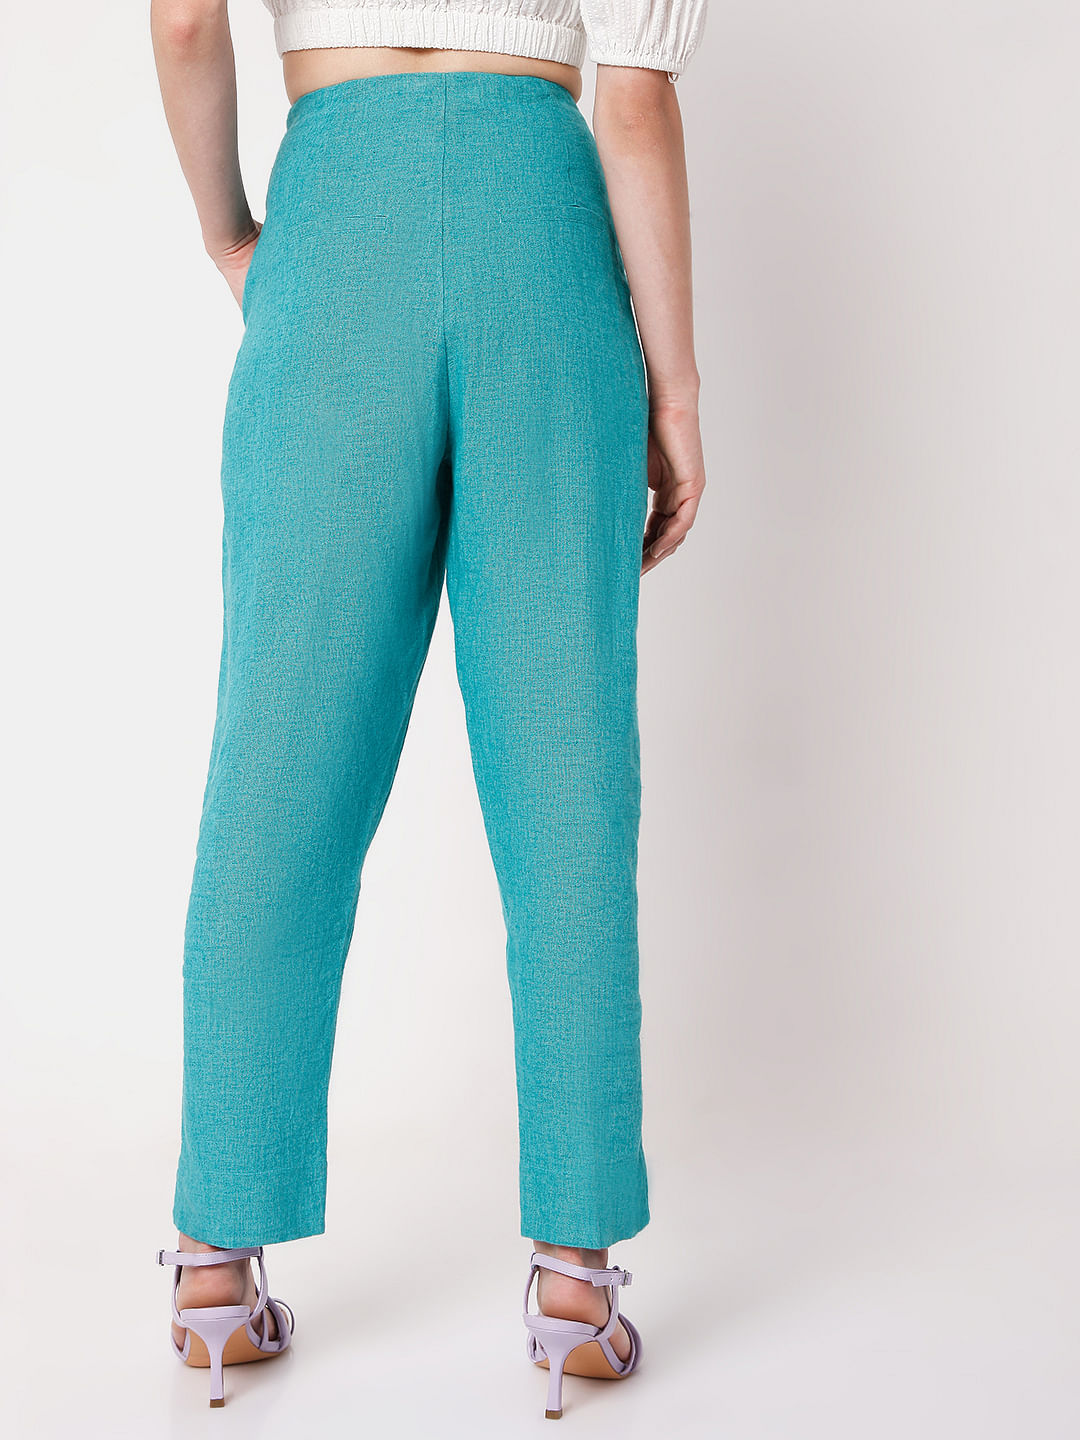 Turquoise Trousers - Buy Turquoise Trousers online in India